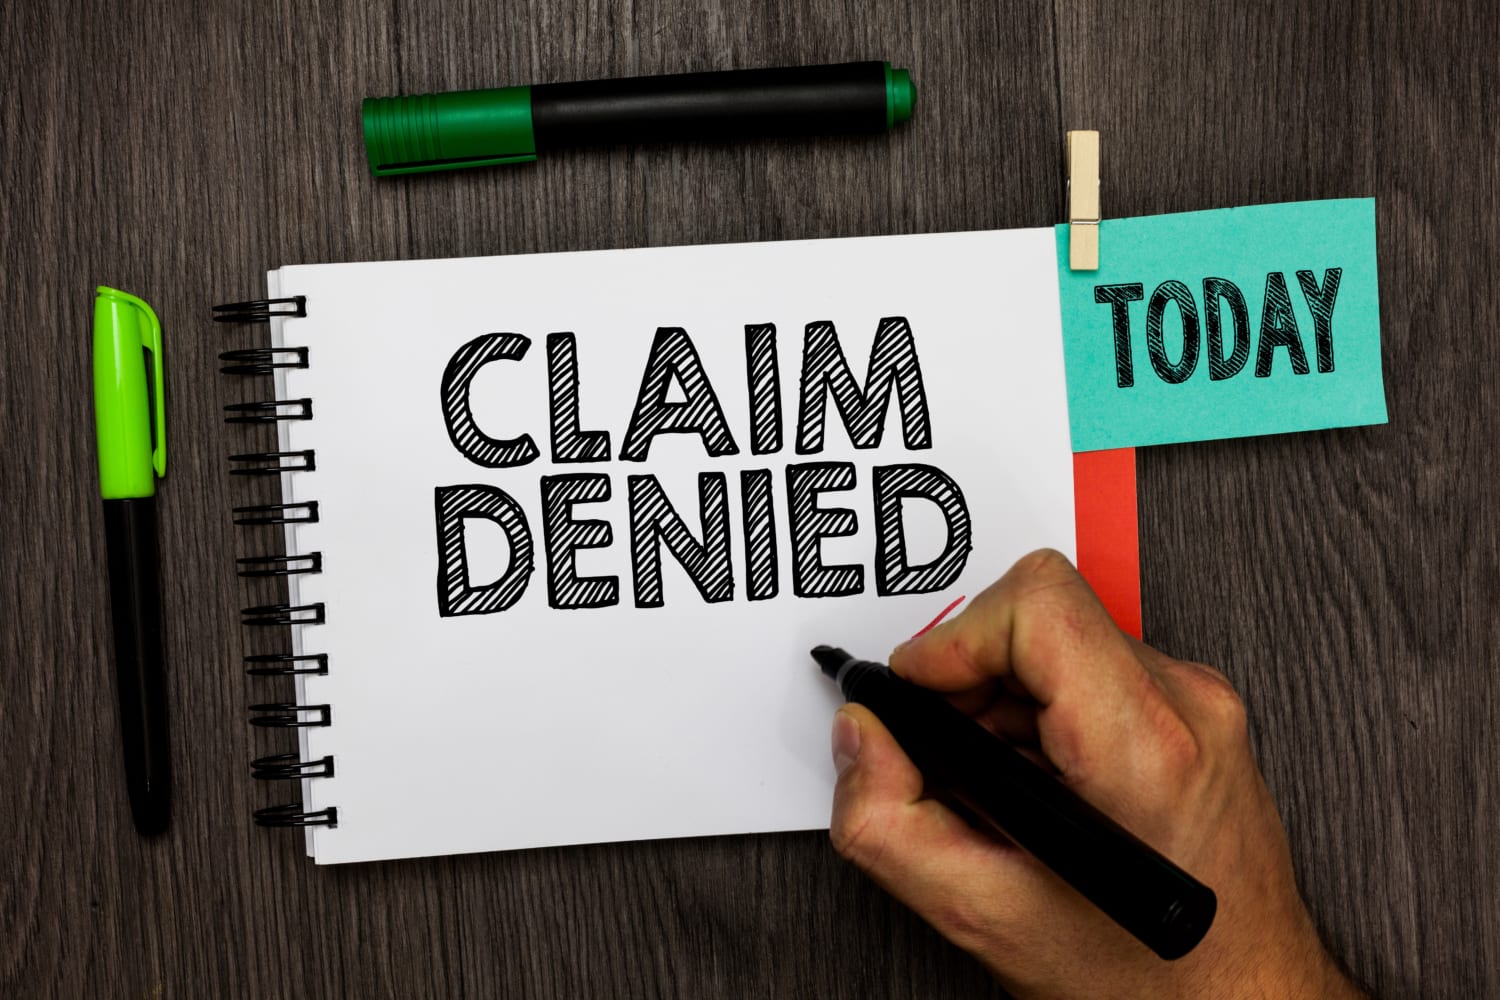 denied life insurance what to do next